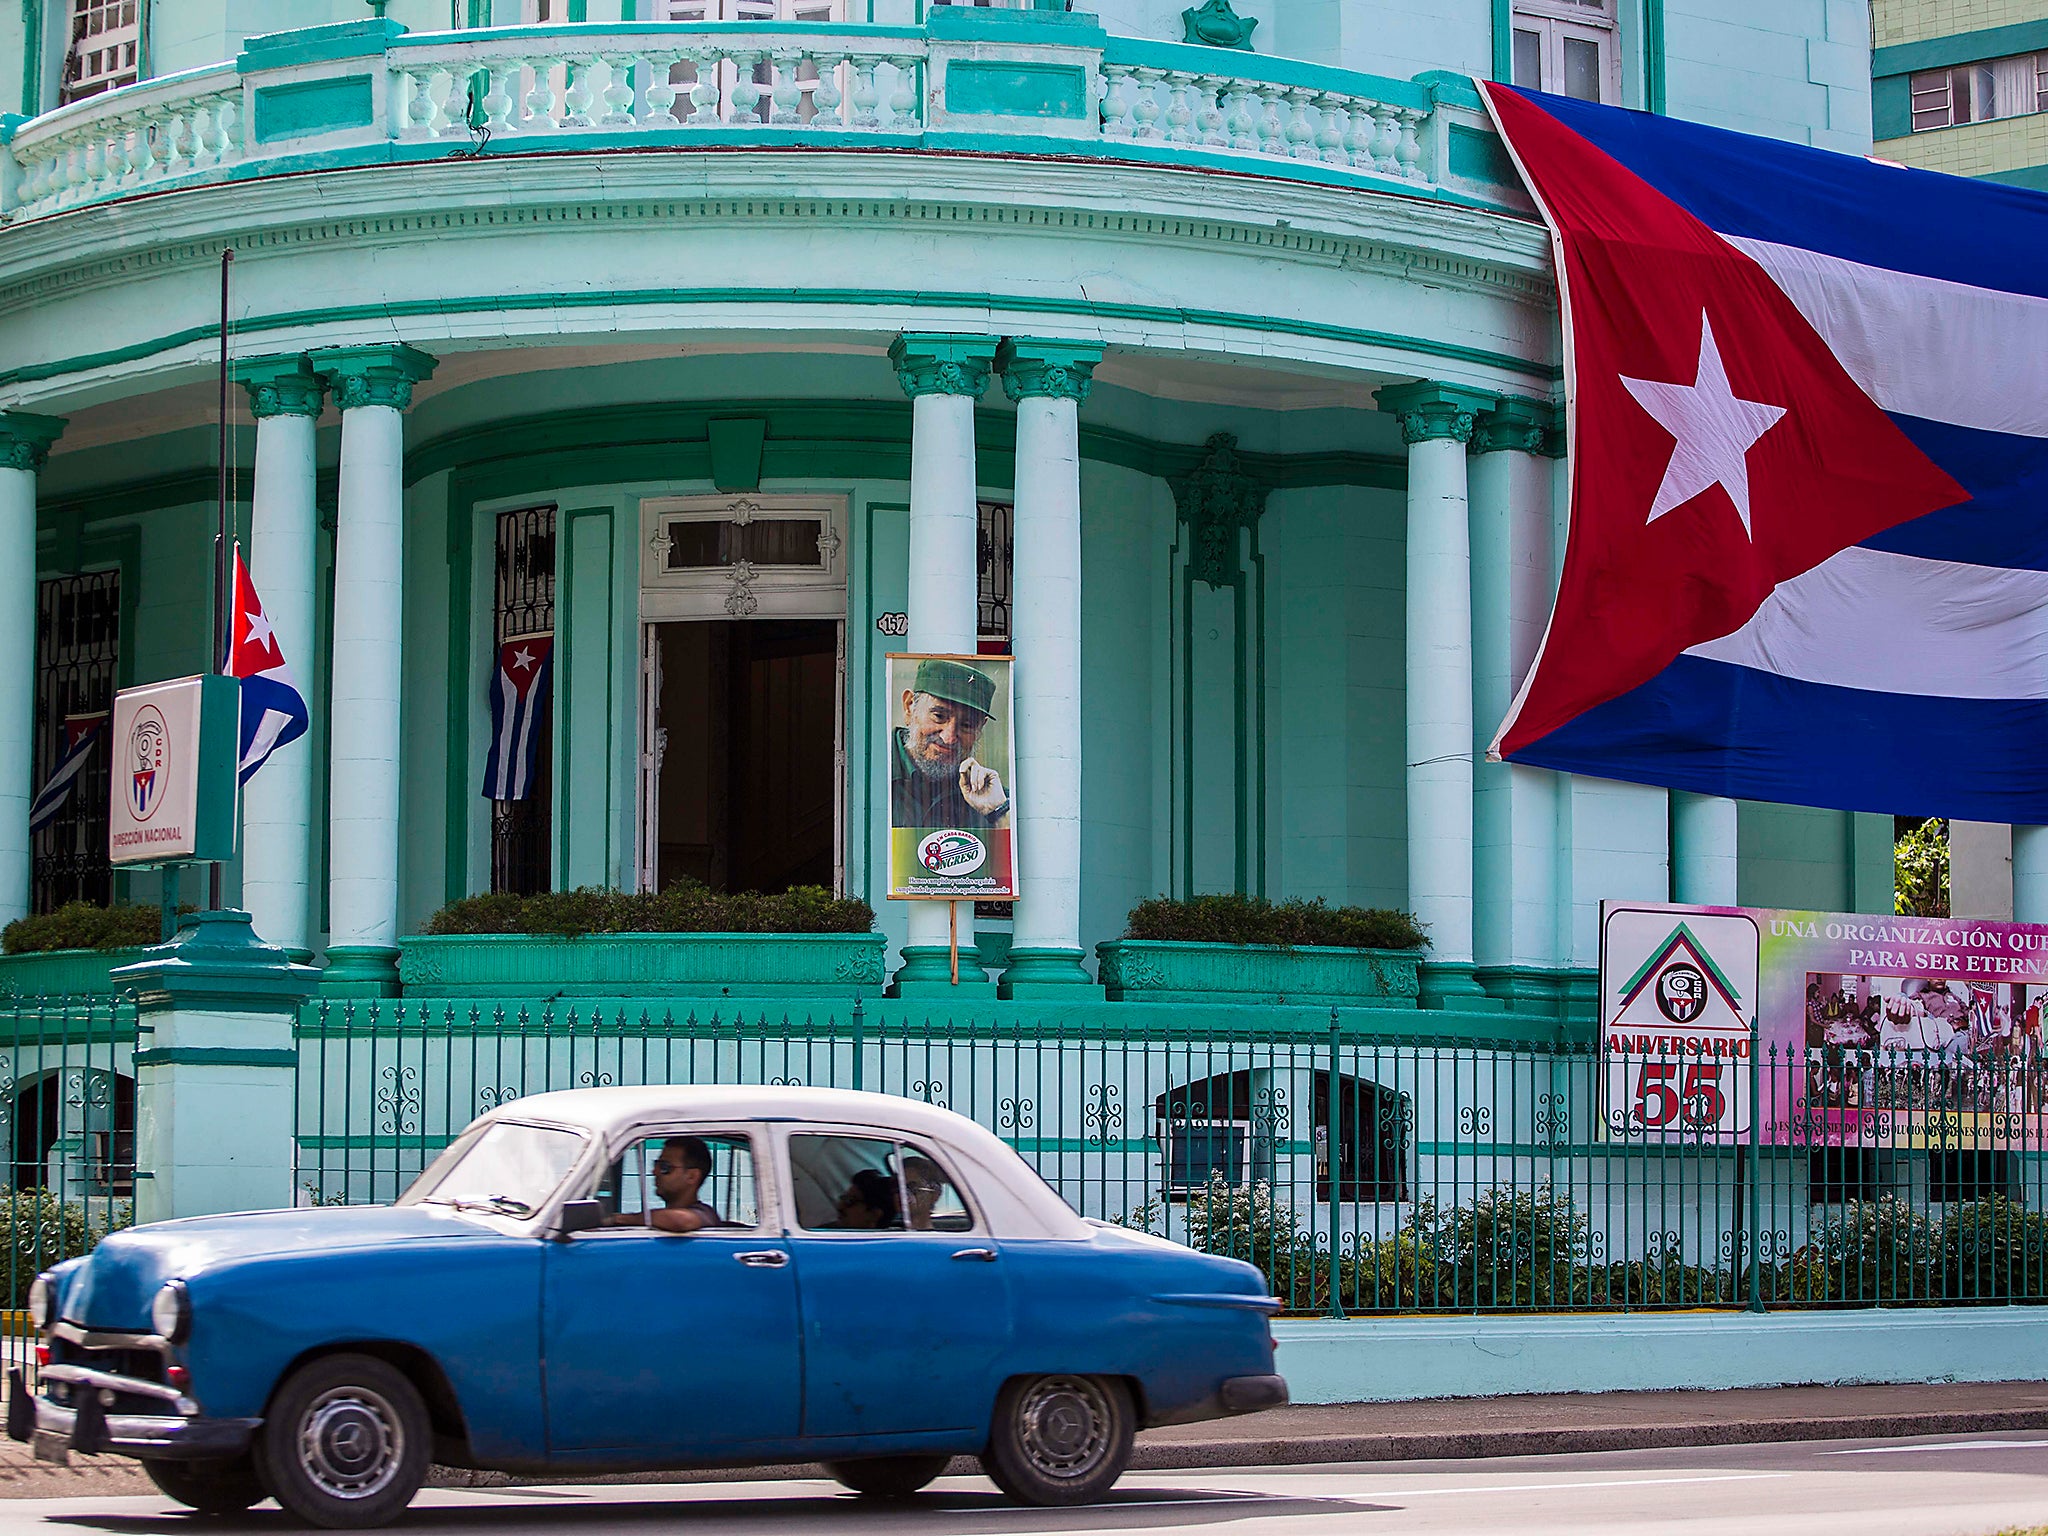 The Cuban government have been largely quiet about the President-elect’s victory